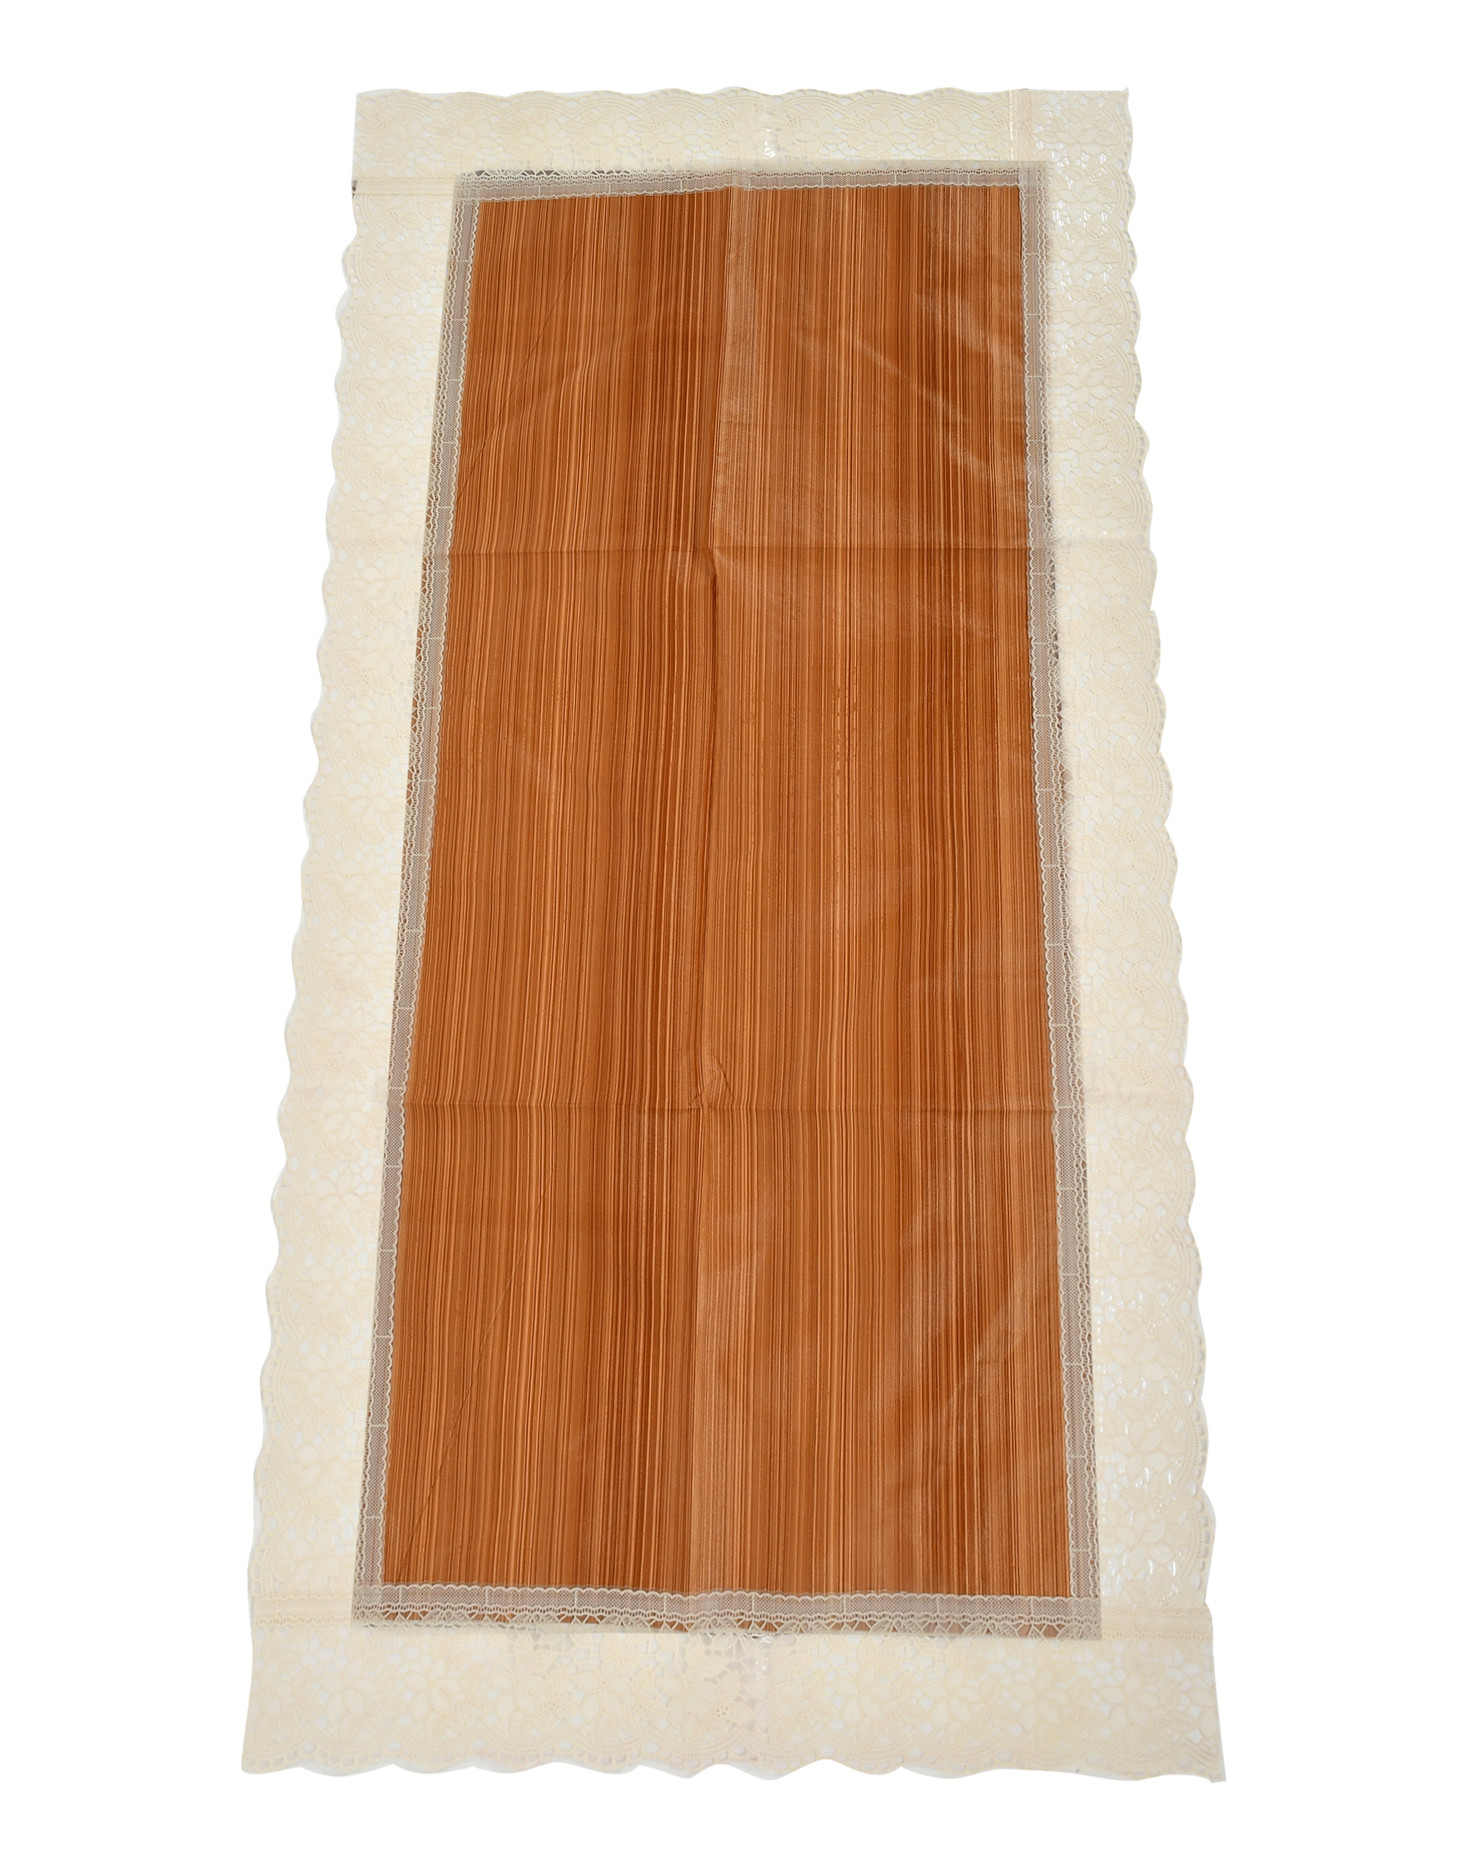 Kuber Industries Wooden Design PVC Table Runner For Farmhouse Dinner, Holiday Parties, Wedding, Events, Décor, 18